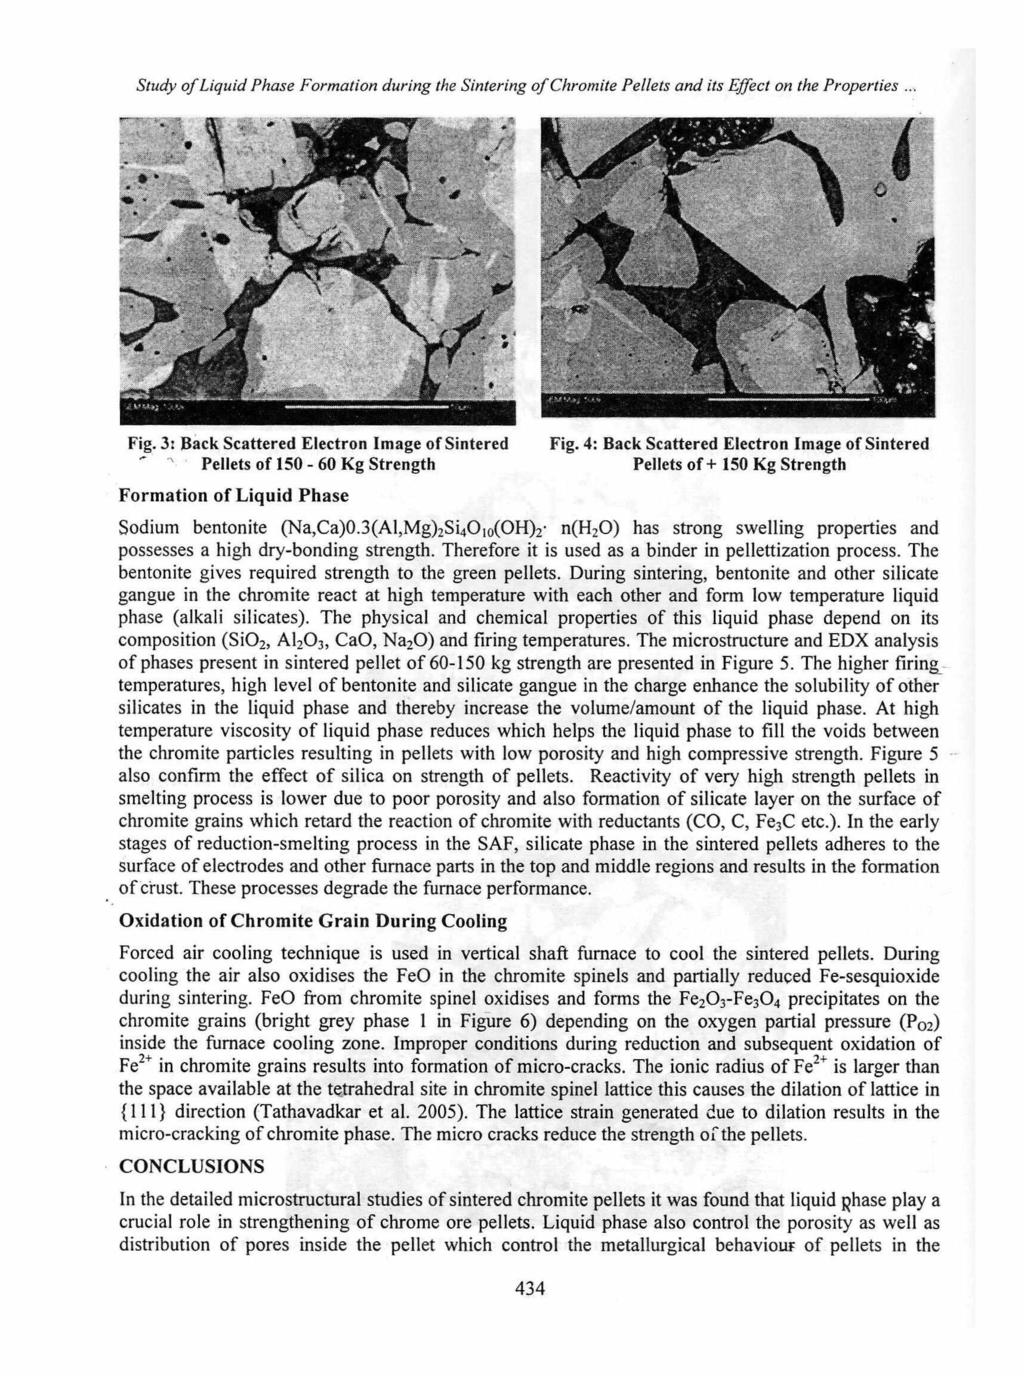 Study of Liquid Phase Formation during the Sintering of Chromite Pellets and its Effect on the Properties... Fig.